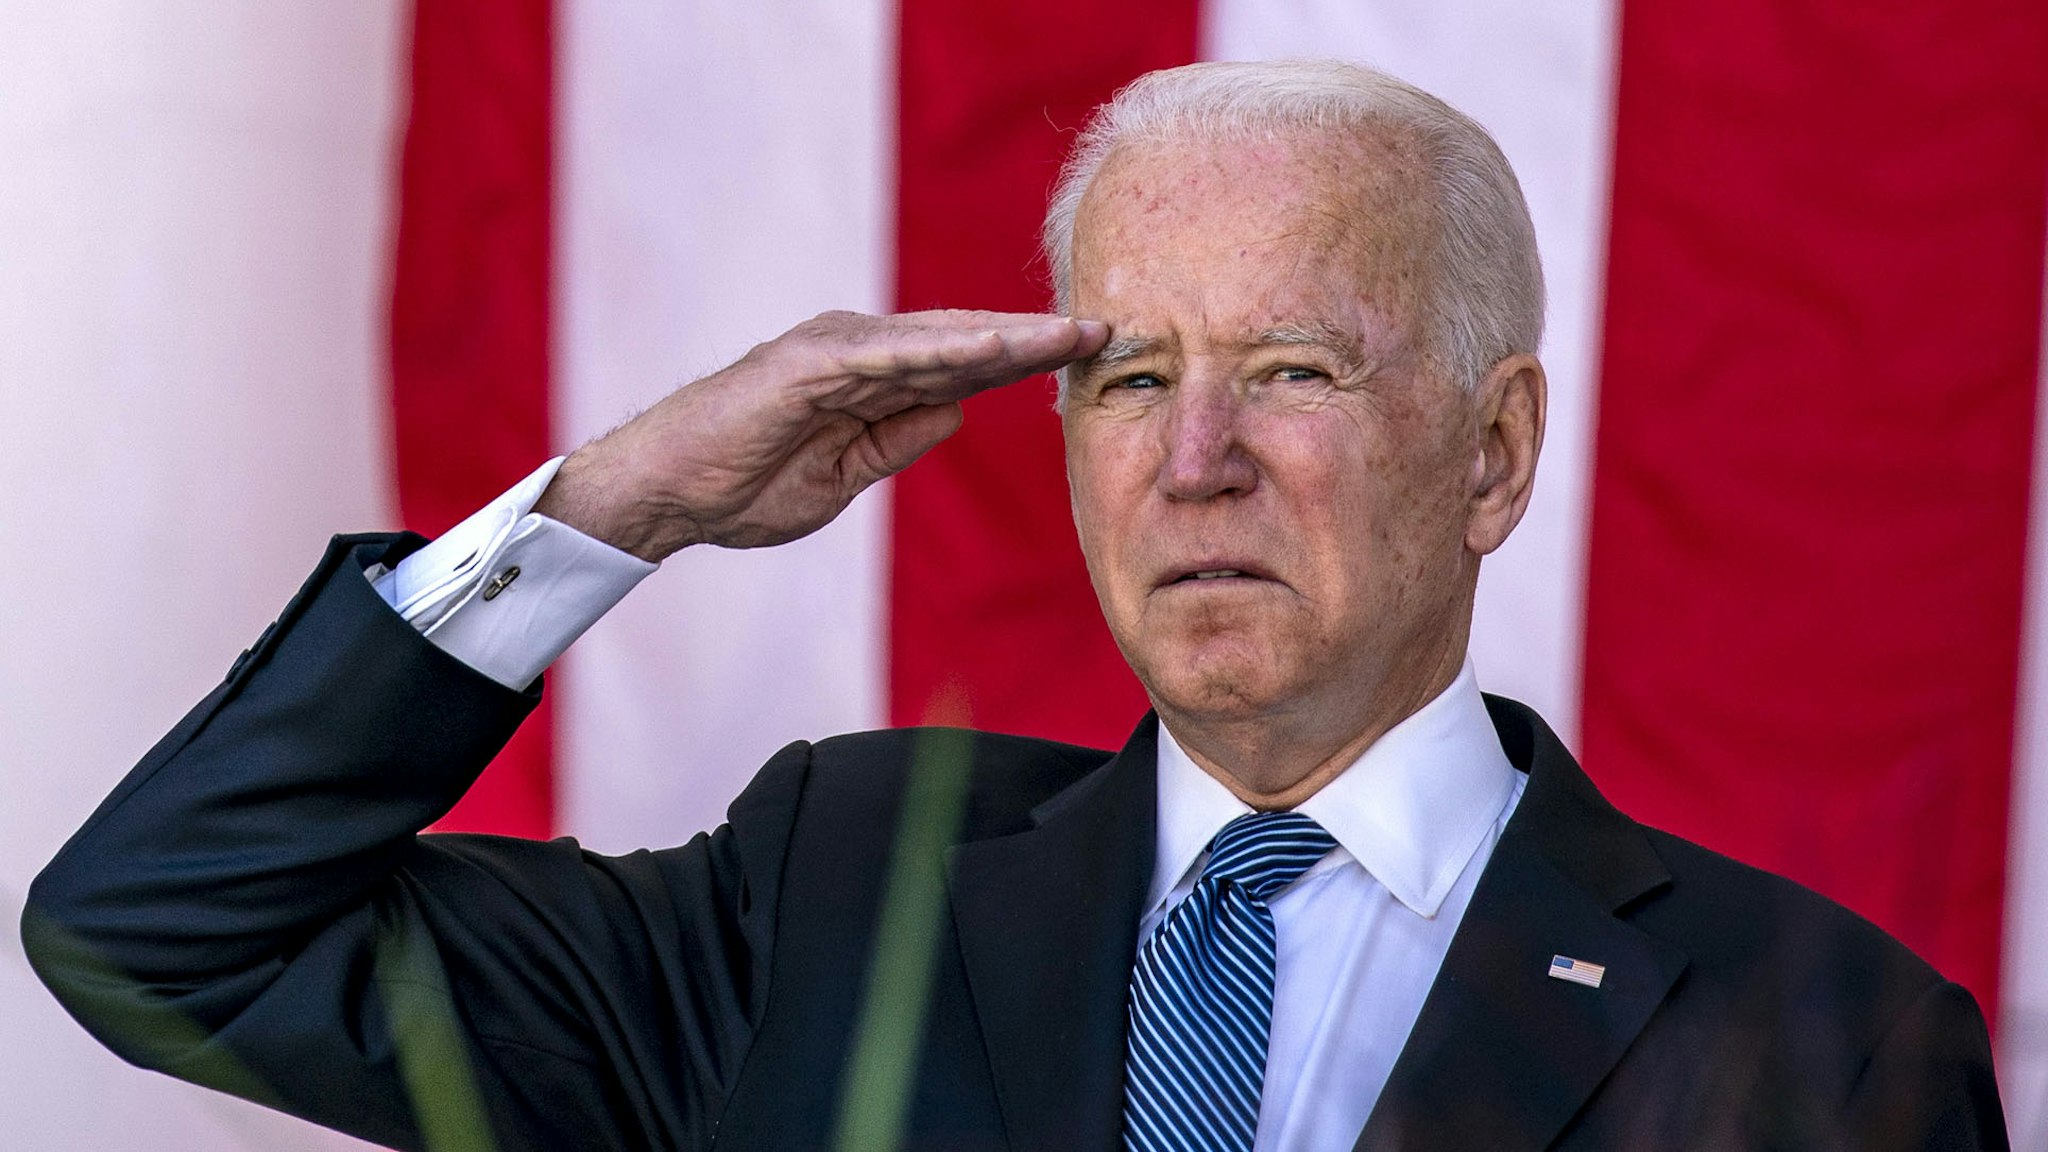 U.S. President Joe Biden saalutes during a Memorial Day ceremony at Arlington National Cemetery in Arlington, Virginia, U.S., on Monday, May 31, 2021. Biden's $6 trillion budget request proposes record spending to reduce historical disparities in underserved communities, following his campaign pledge to promote racial equity as an inseparable part of rebuilding the economy.